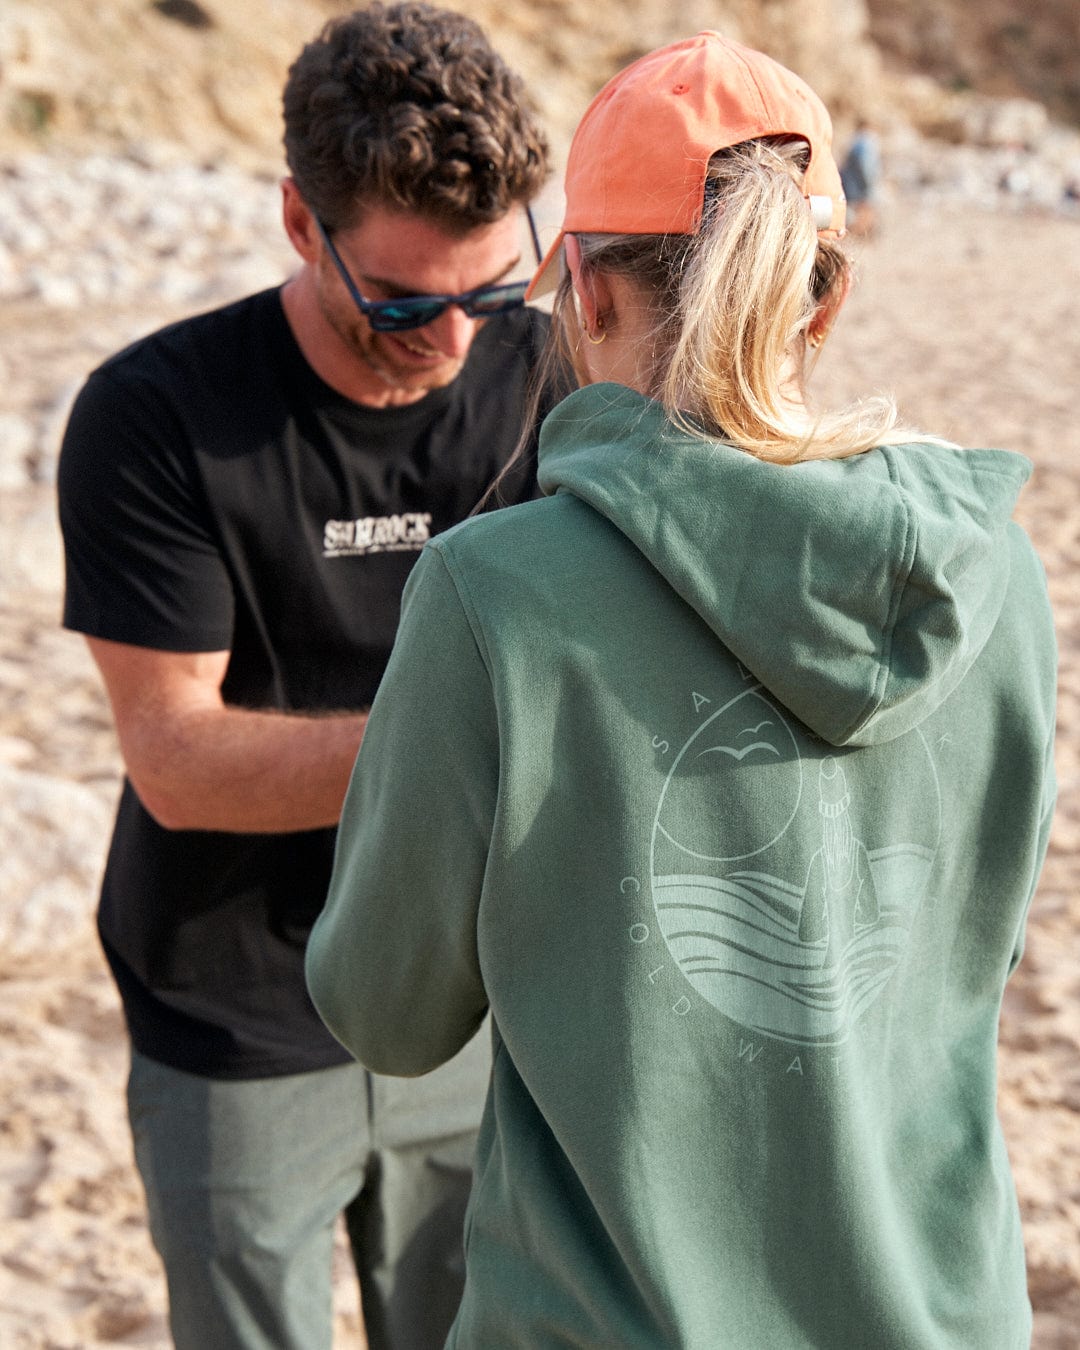 Two people engaged in a conversation on a sandy beach, wearing Coldwater Club - Ladies Zip Hoodie - Green Saltrock shirts.